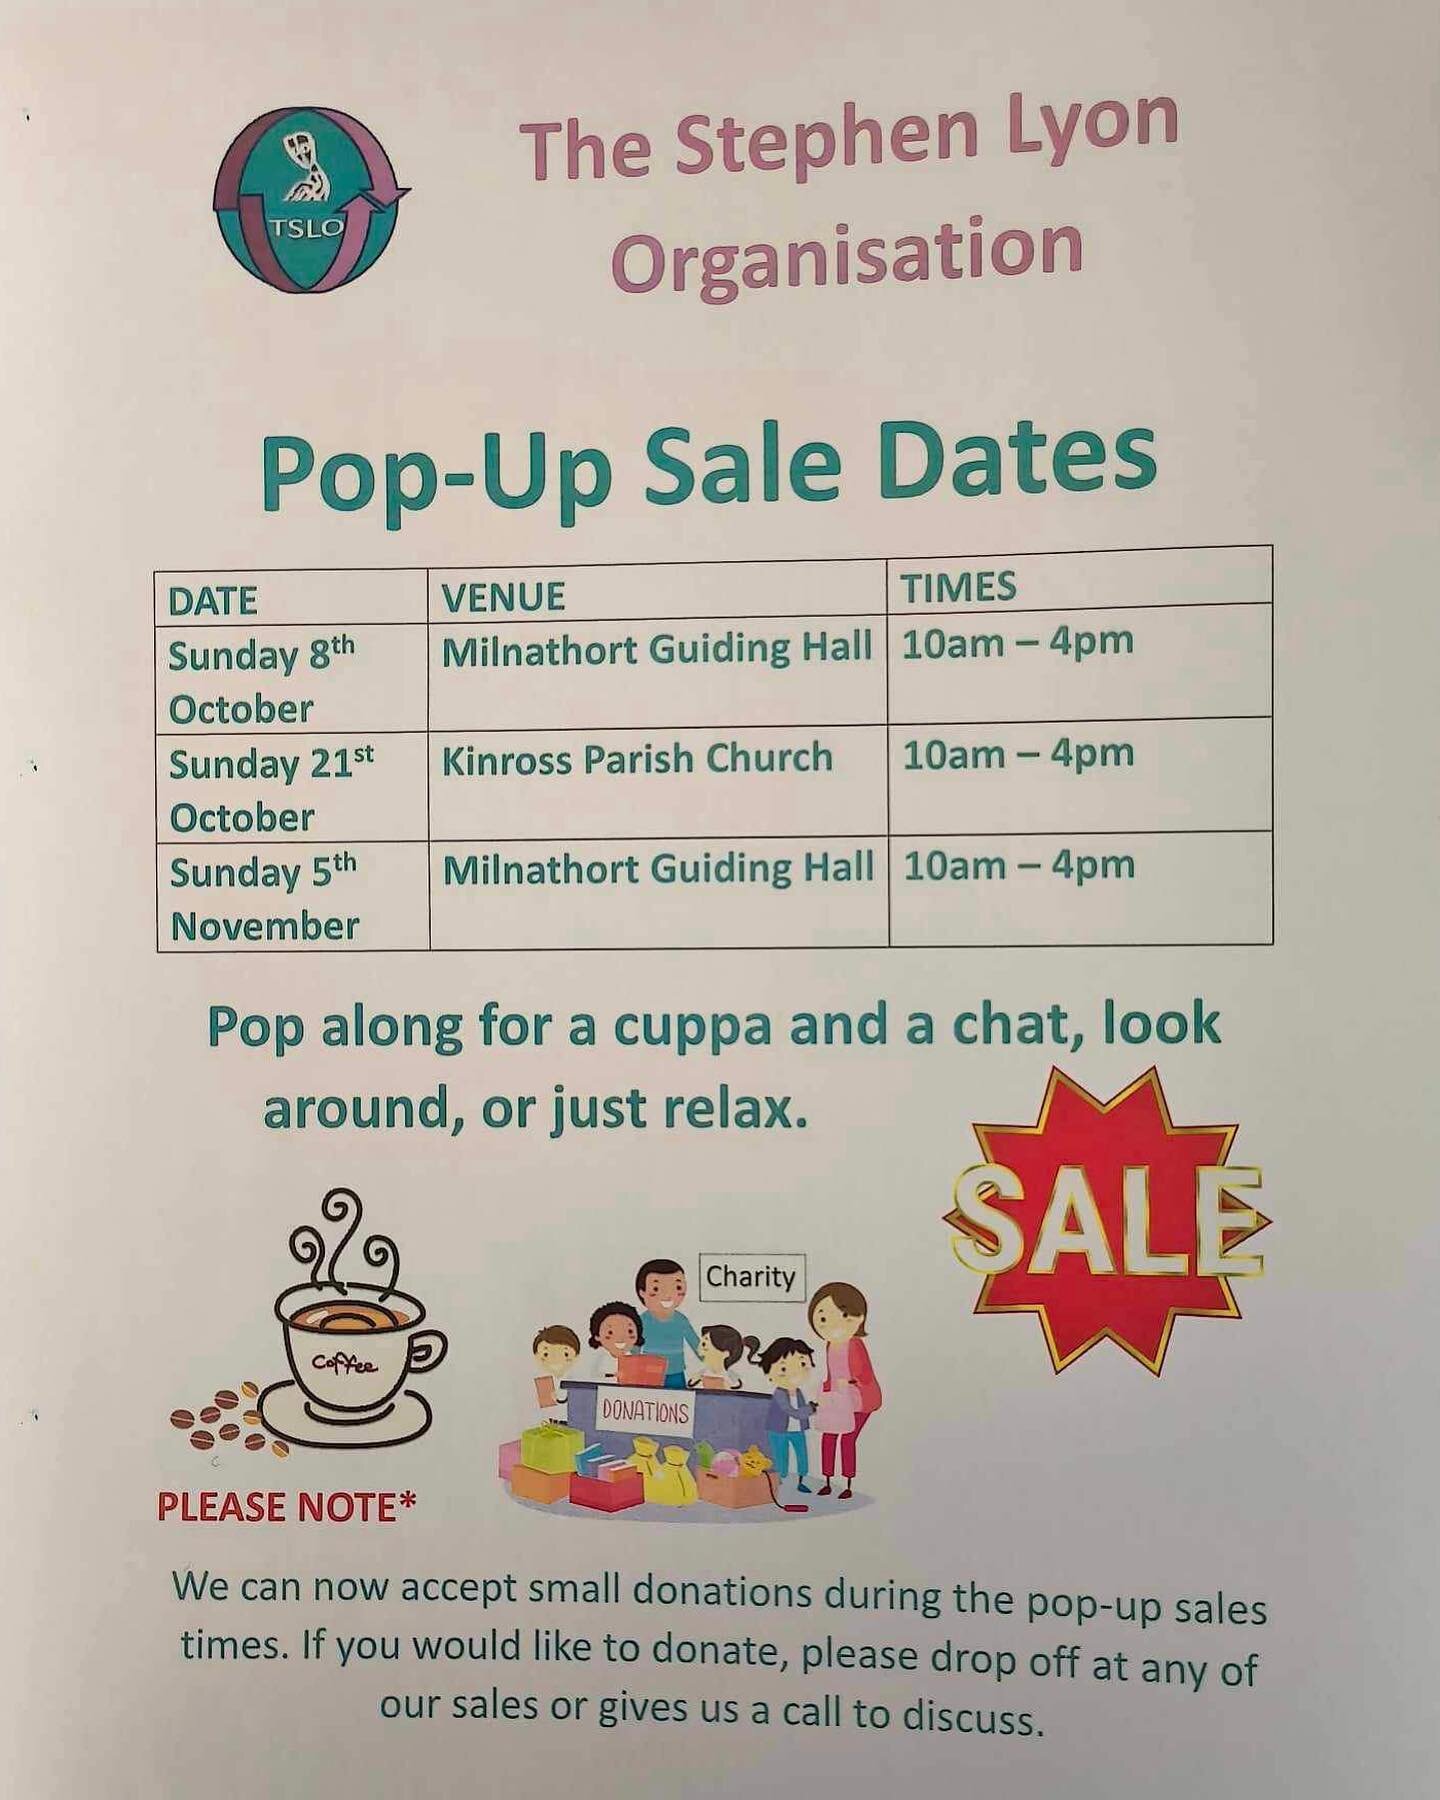 UPDATE: There is a mistake on the flyer for the pop up shop taking place on Saturday 21st October. This will be held within the Kinross Church centre on Saturday 21st October.

We are excited to be able to give everyone the list of our next three pop